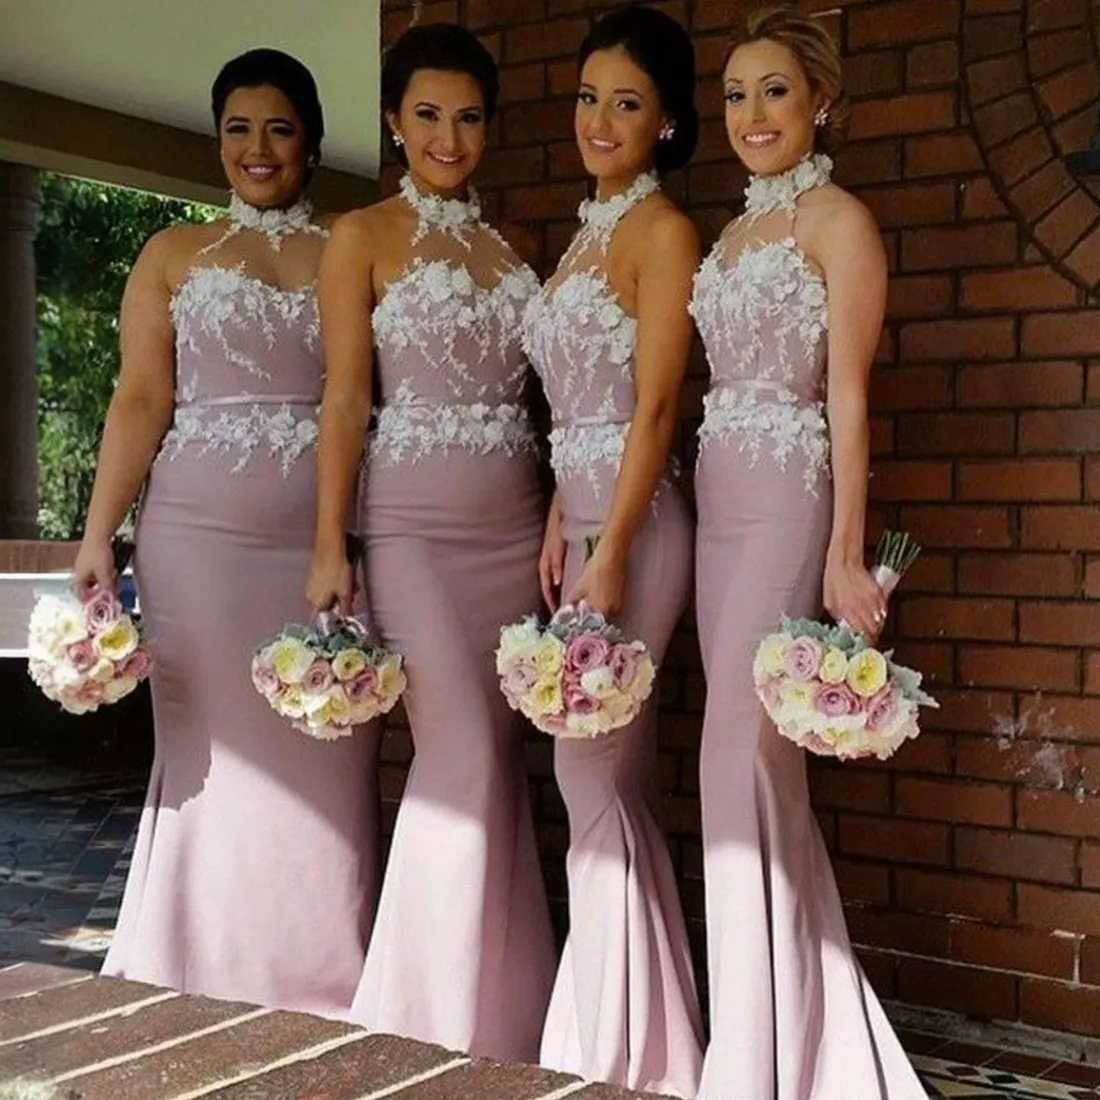 Dusty Rose Bridesmaid Dresses Mermaid Halter Appliqued Lace with Belt Maid of Honor Elastic Satin Bride Gowns for African Black Women Girls Marriage BR084